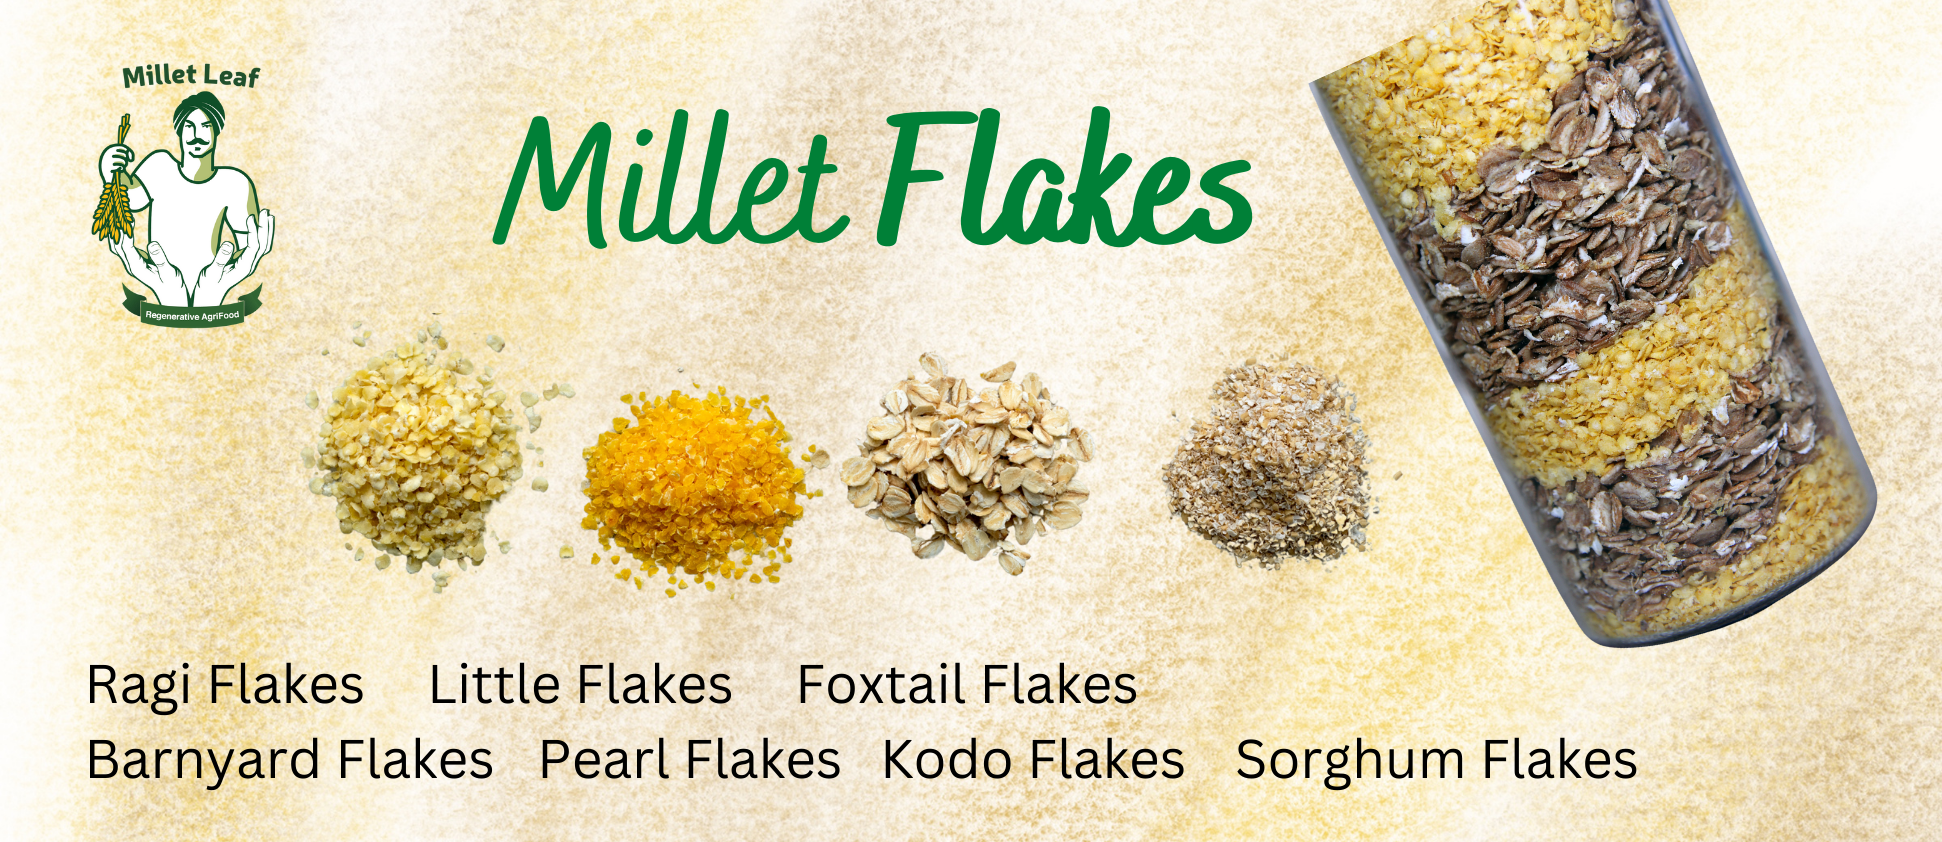 Millet Leaf Healthy Millet delicious Flakes_ Aval